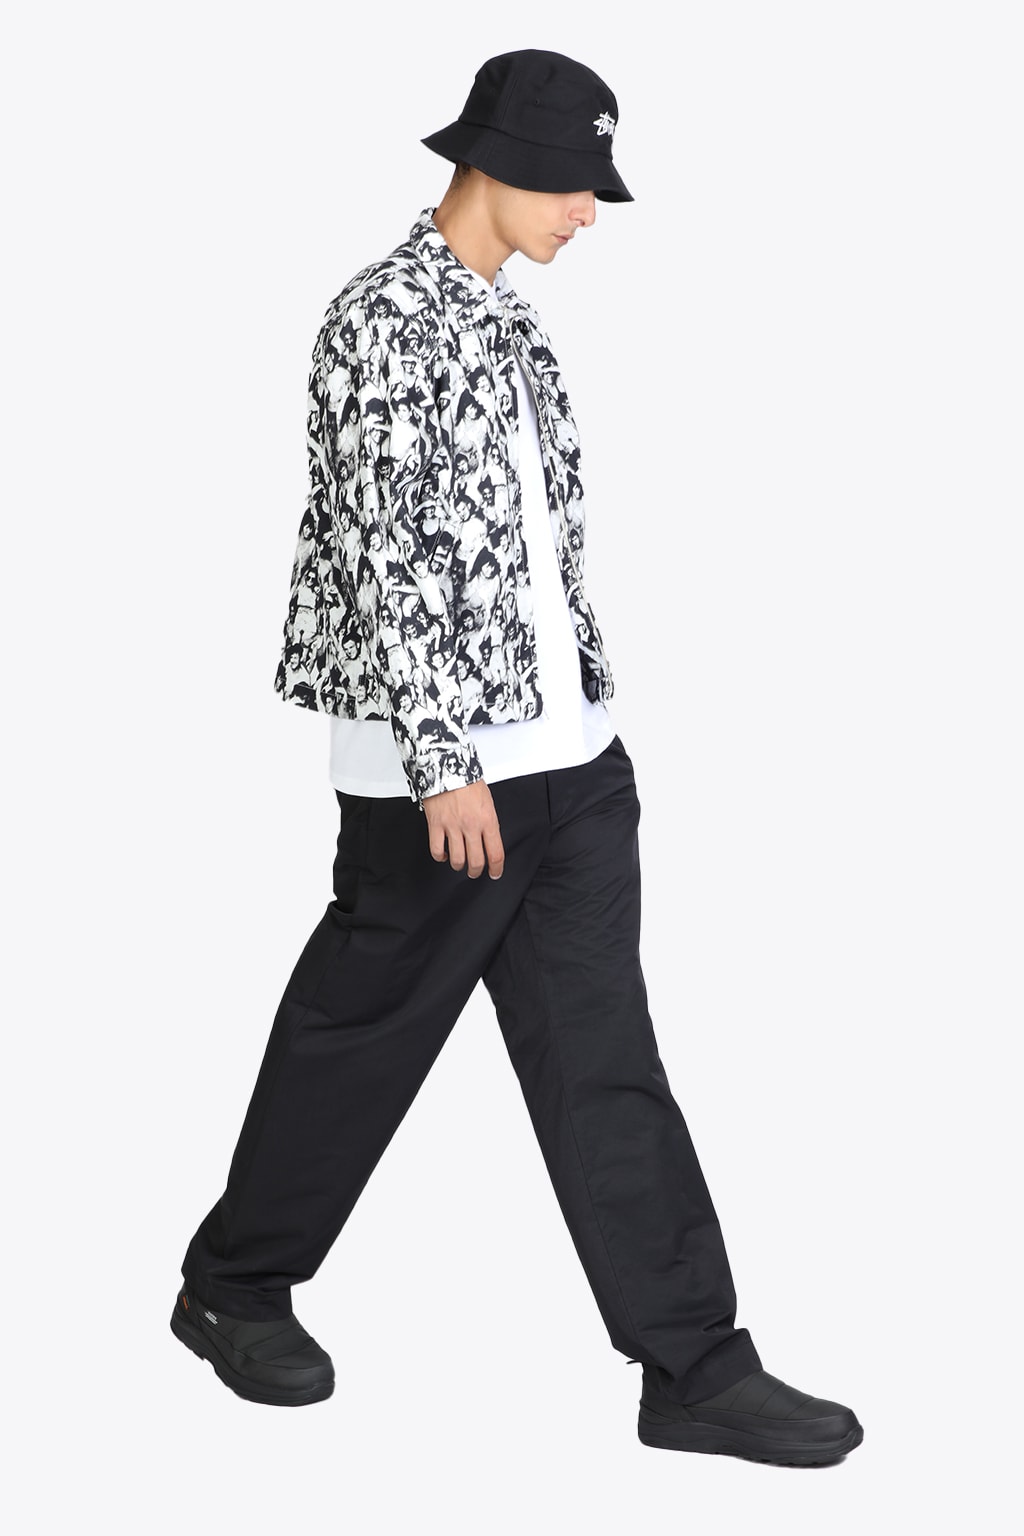 STUSSY BEACH MOB BING JACKET BLACK AND WHITE CANVAS JACKET WITH ALL-OVER PRINT - BEACH MOB BING JACK